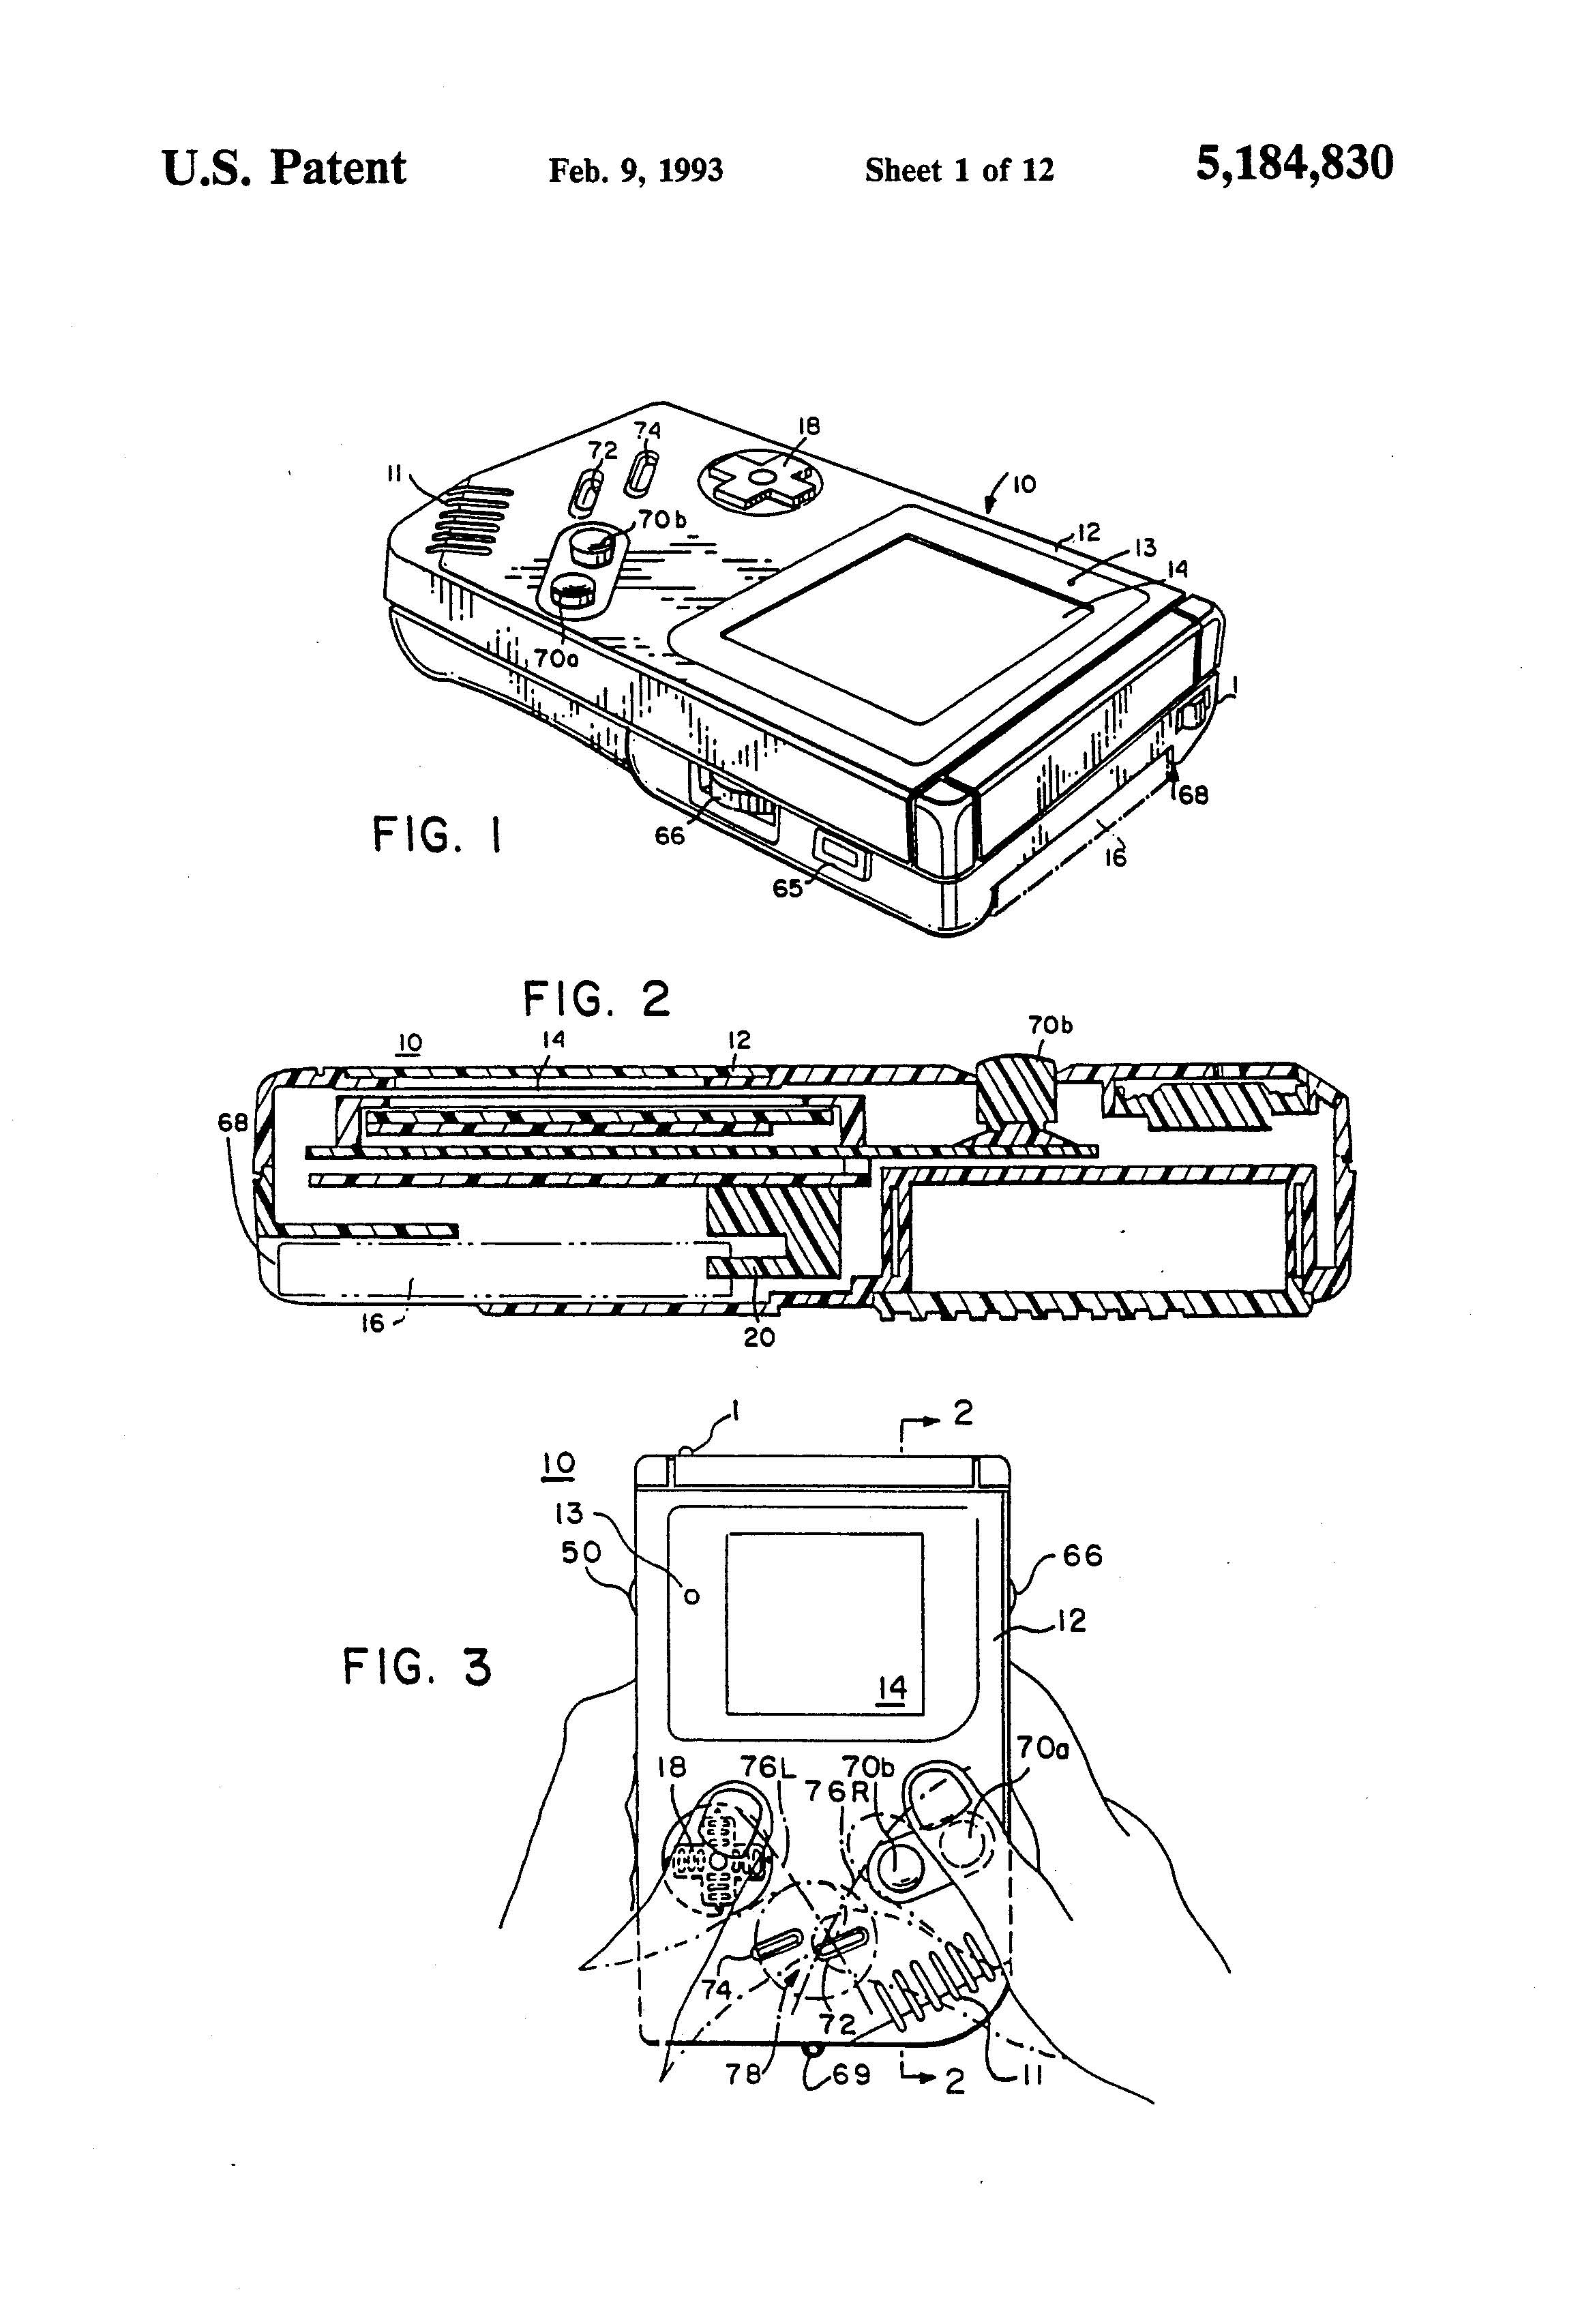 Patent of the Week: Compact Hand-Held Video Game System (Gameboy)